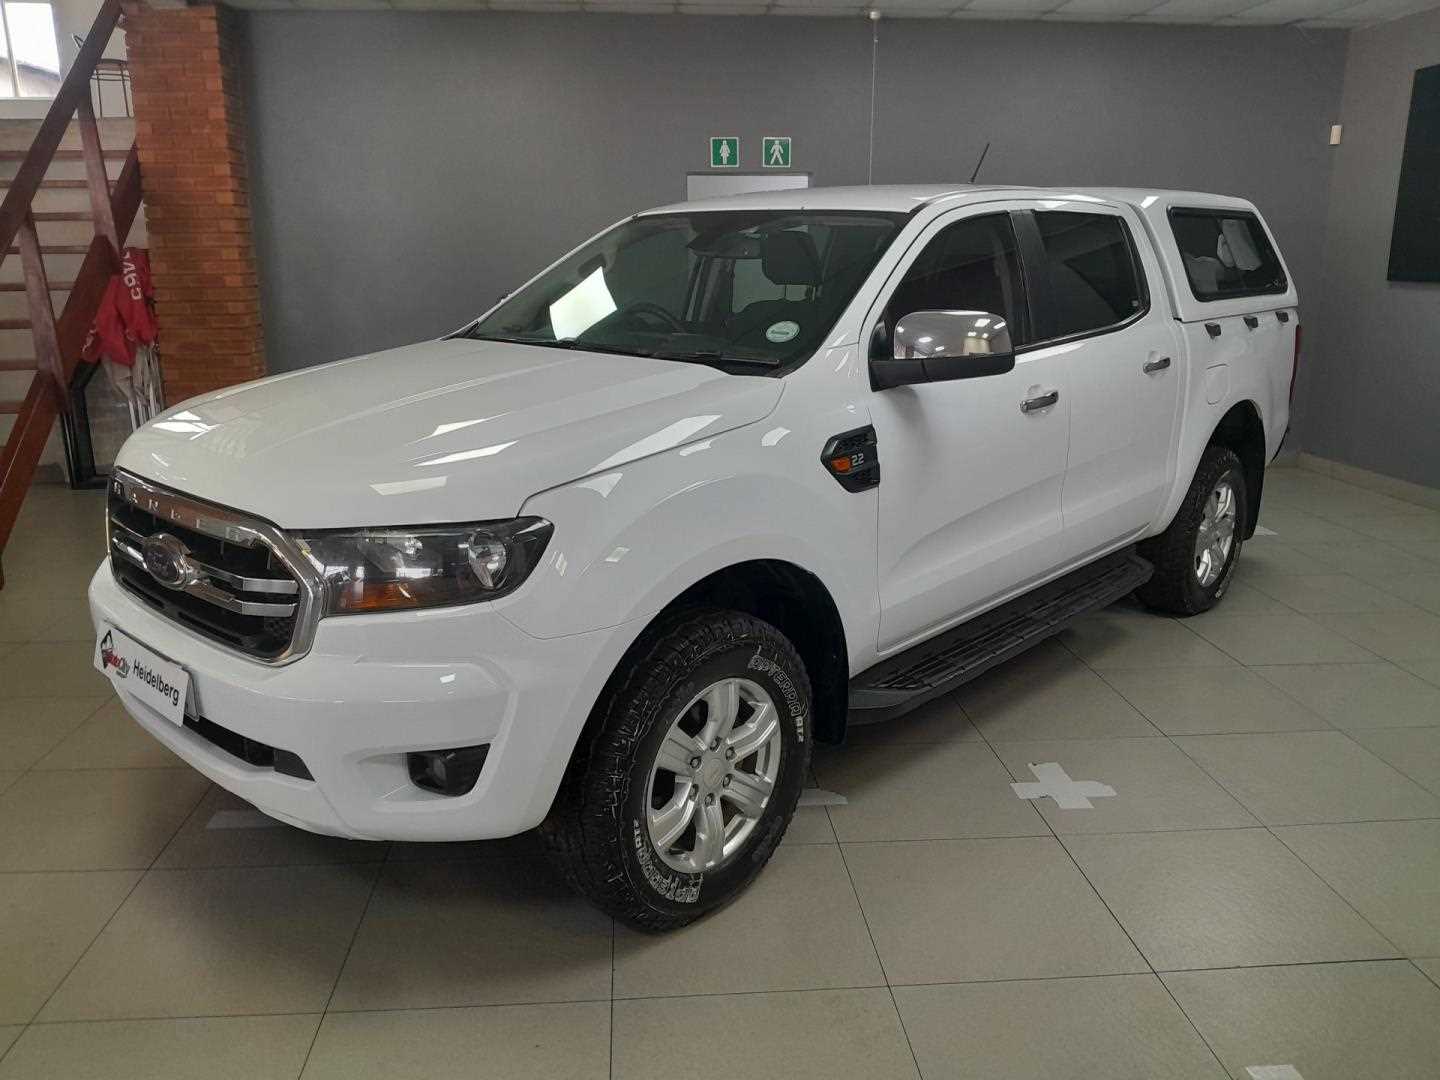 FORD RANGER 2.2TDCi XLS P/U D/C for Sale in South Africa